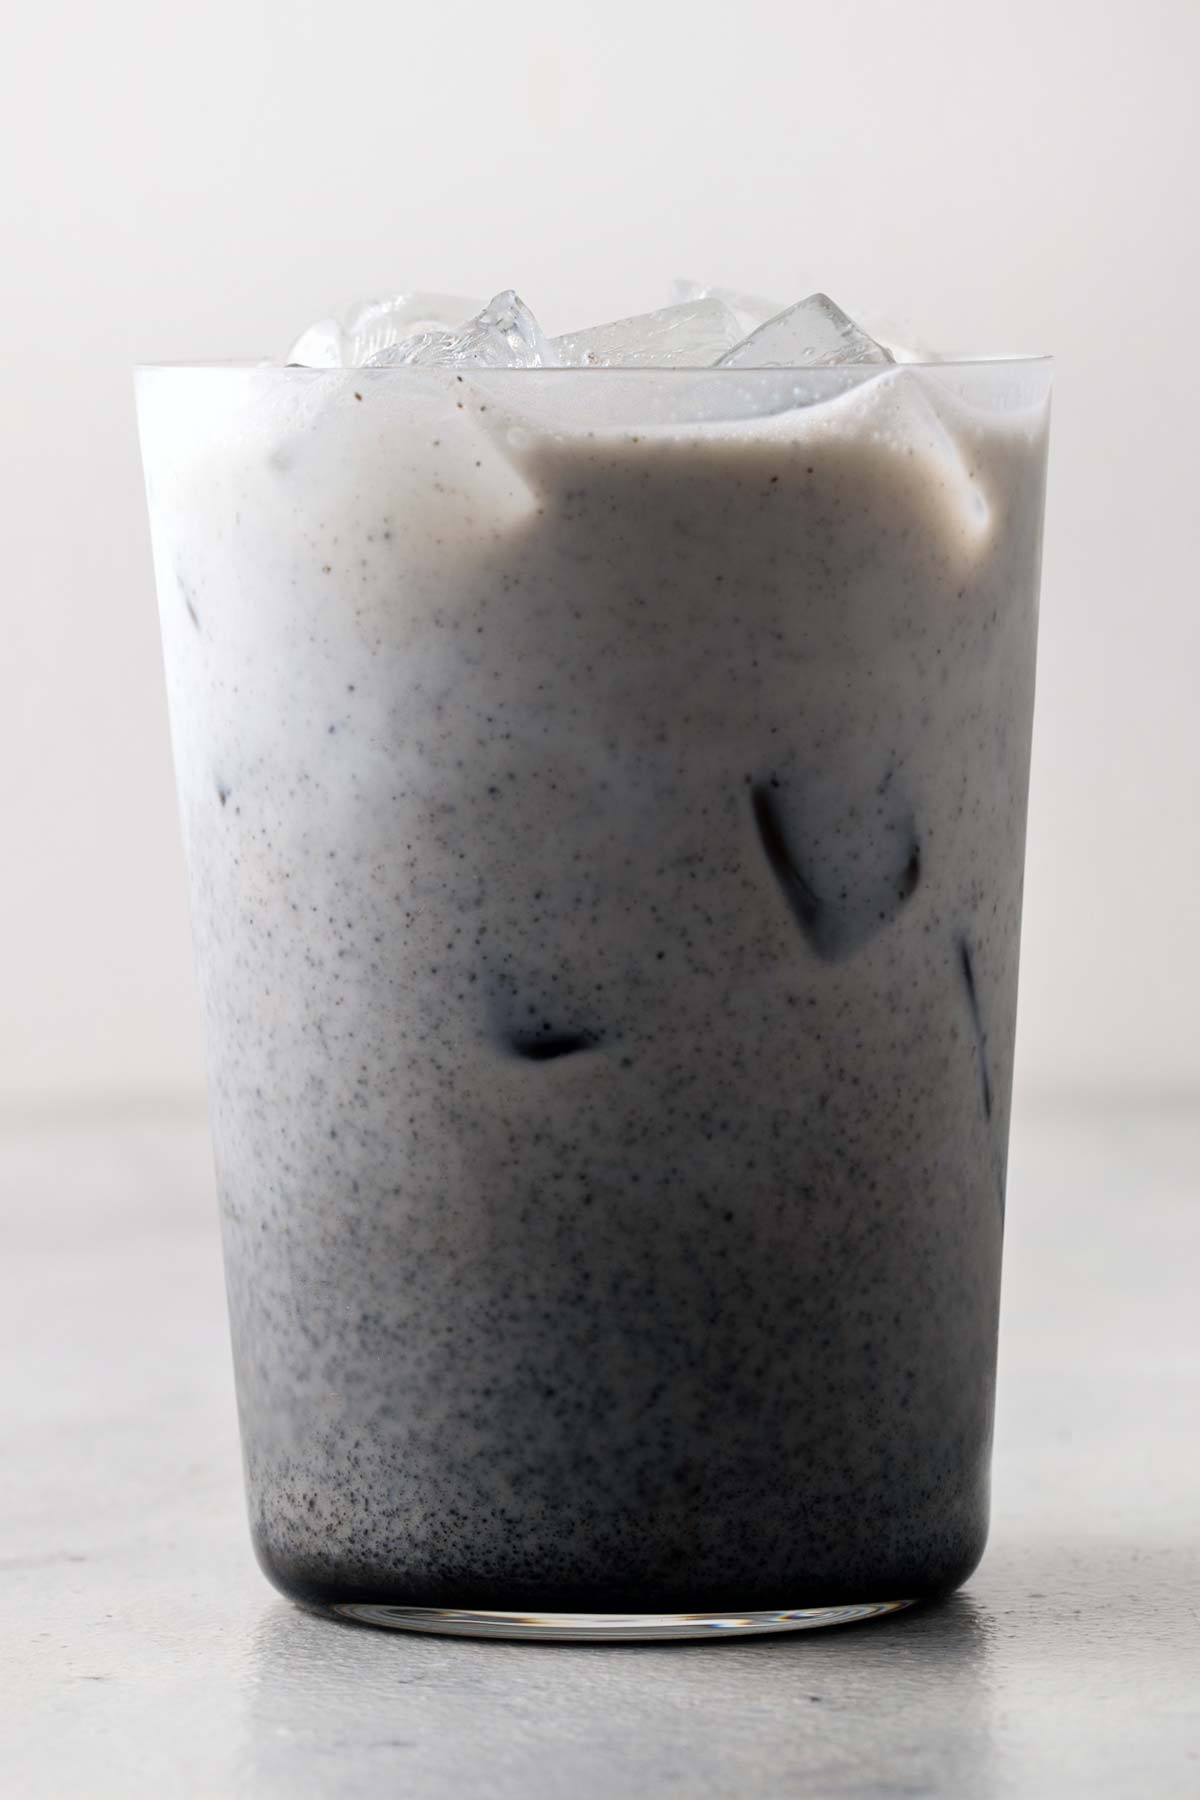 Iced Black Sesame Latte in clear glass.